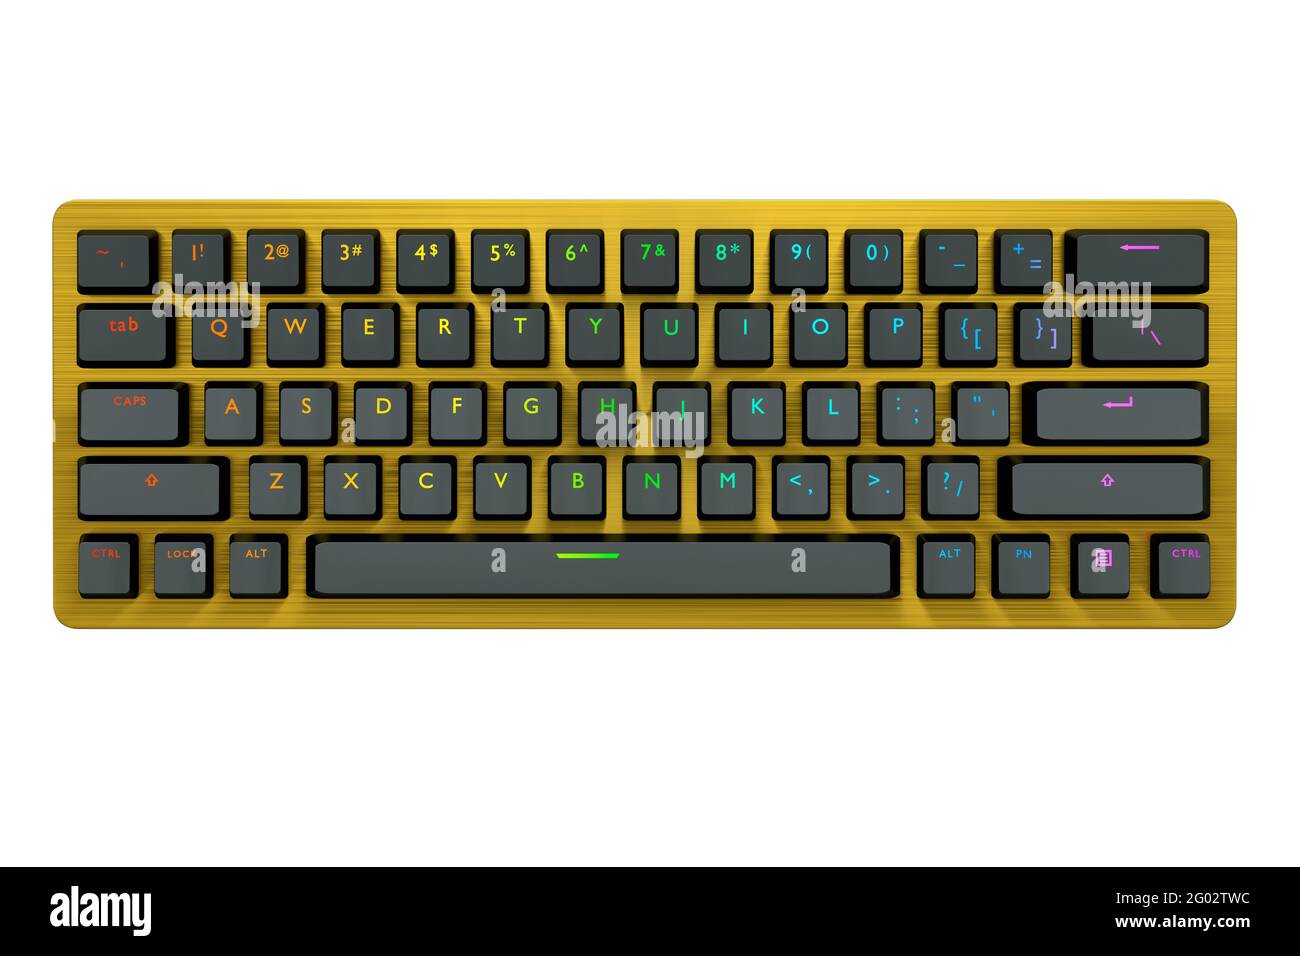 Yellow computer keyboard with rgb colors isolated on white background. Stock Photo